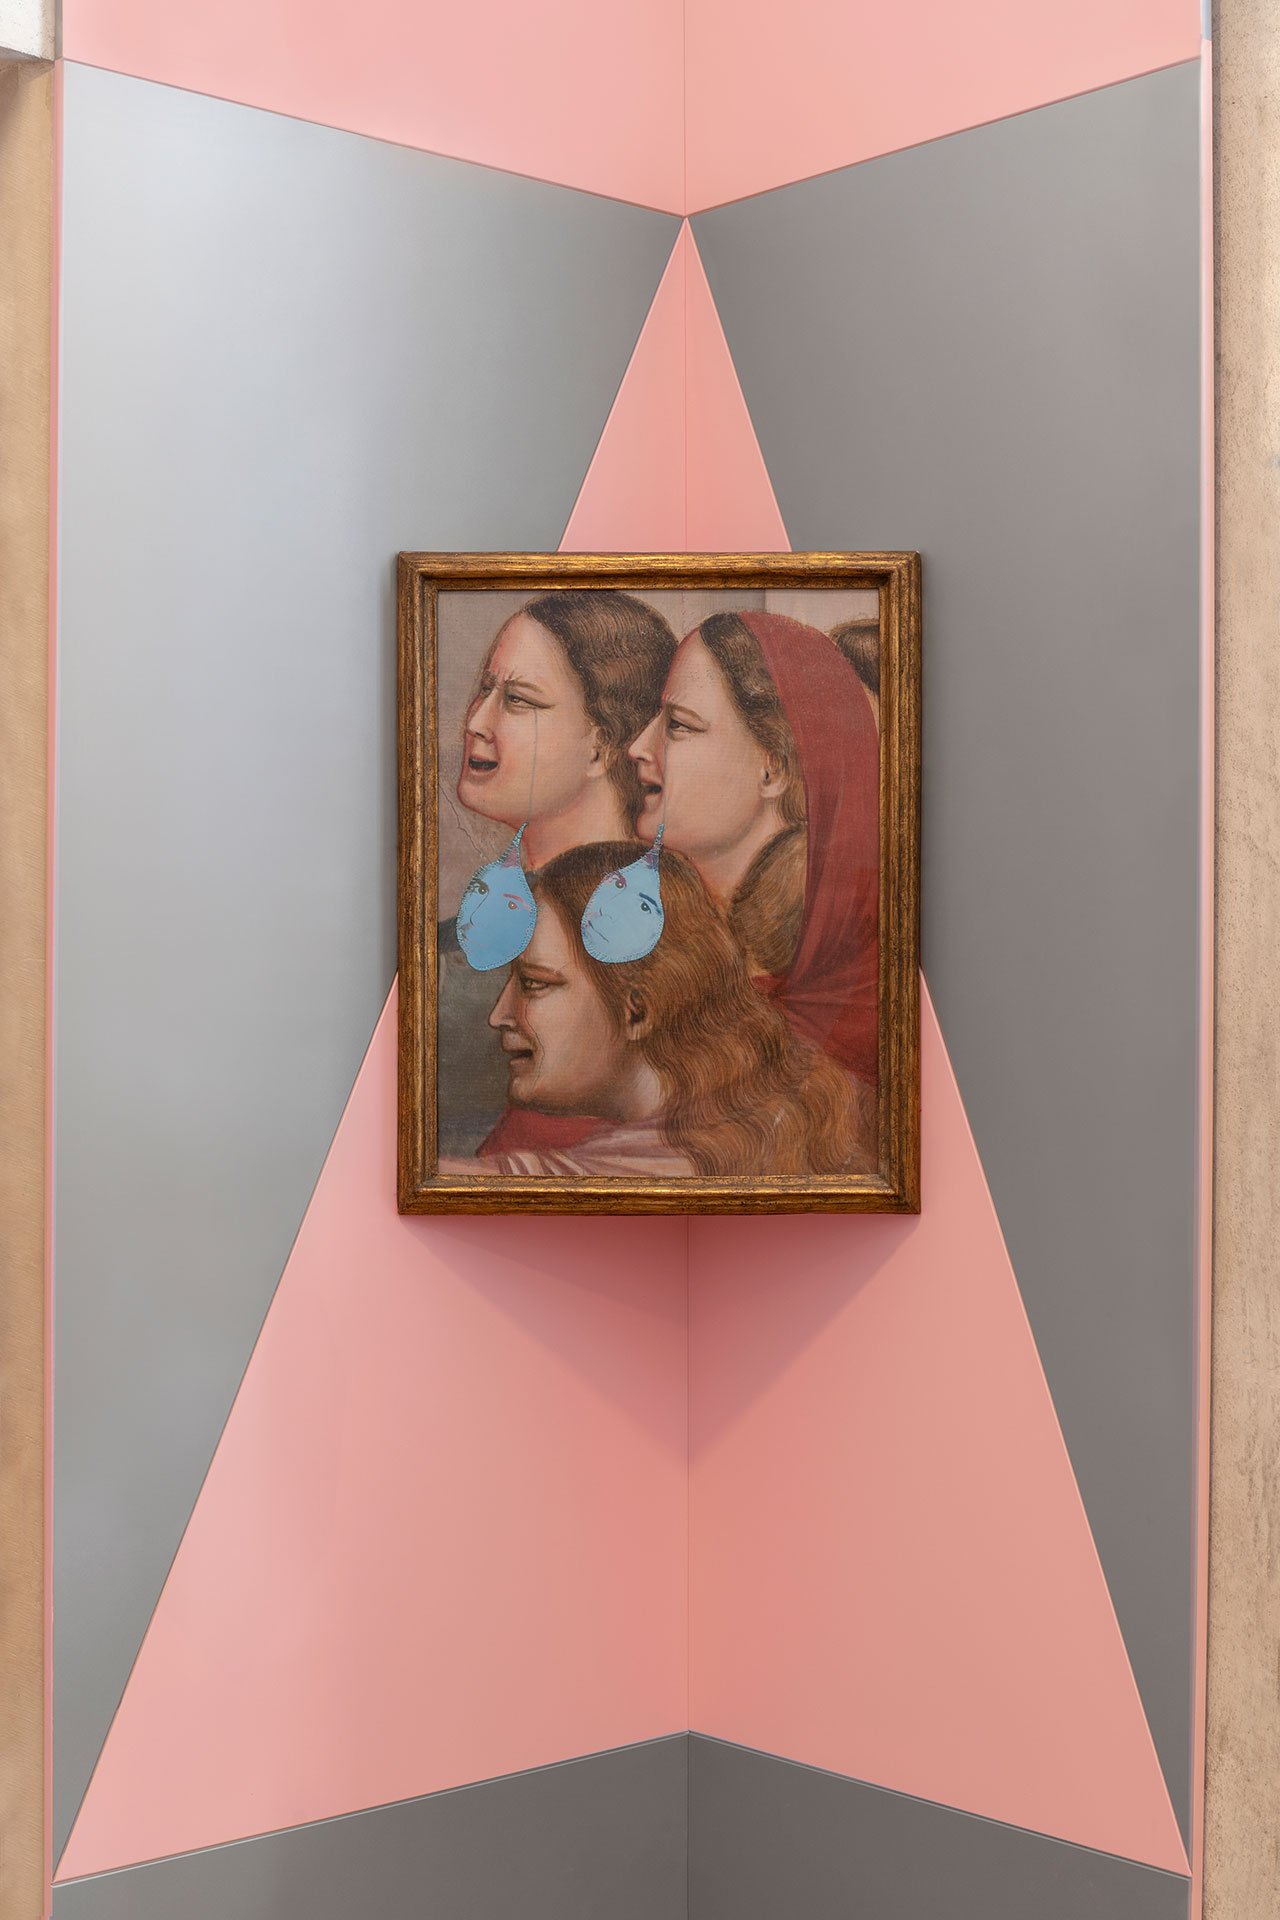 Francesco Vezzoli, CASINO (GIOTTO, WYNN AND WARHOL WERE GAMBLERS), 2024.
Inkjet print on canvas, paper, metallic embroidery, artist's frame, 74 x 58 cm.
Installation view, Musei delle Lacrime, 2024, Museo Correr, Venice, Italy. 
Courtesy the Artist and APALAZZOGALLERY.
Photography by Melania Dalle Grave, DSL Studio.